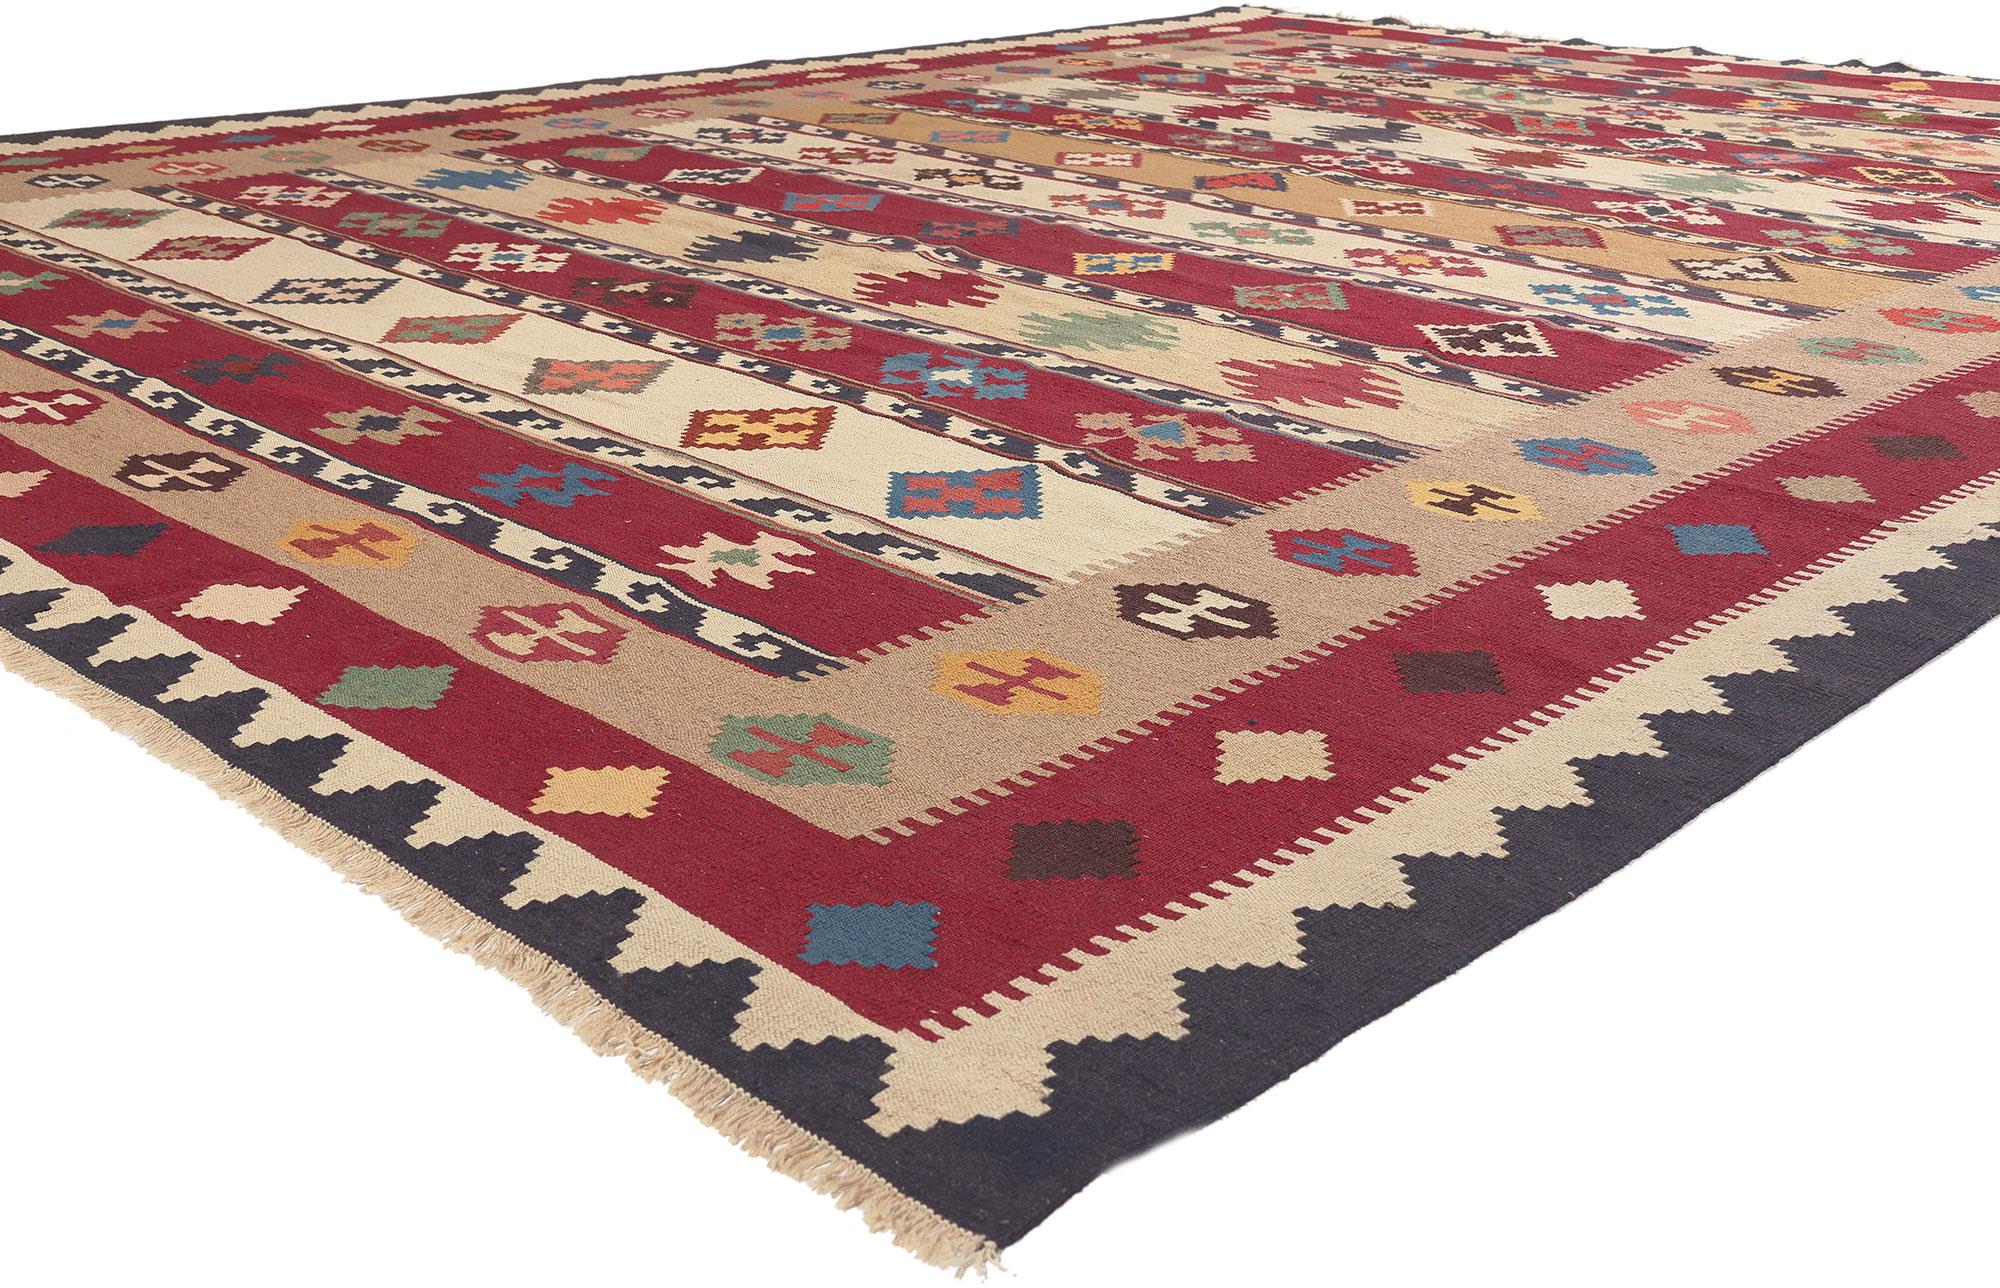 78605 Vintage Persian Shiraz Tribal Kilim Rug, 09'10 x 12'11. 
Emanating nomadic charm with incredible detail and texture, this handwoven vintage Persian Shiraz kilim rug is a captivating vision of woven beauty. The eye-catching tribal design and